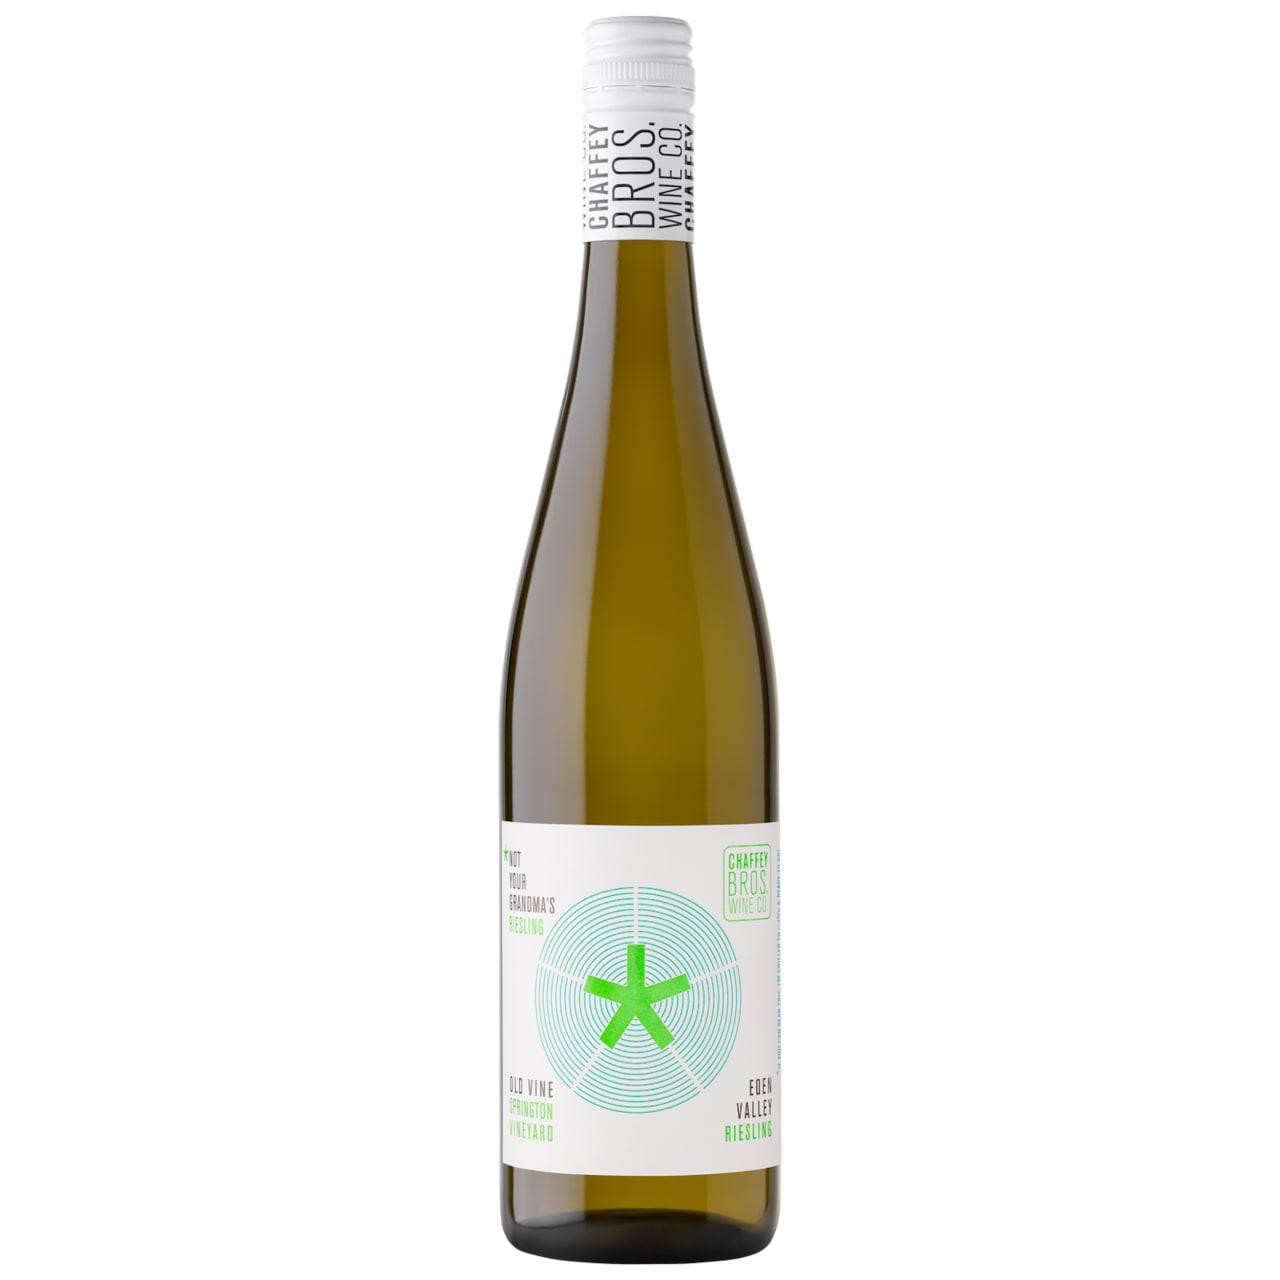 Floral, lemon/lime and lychee aromas are followed by intense apple, lime and orange blossom on the palate.